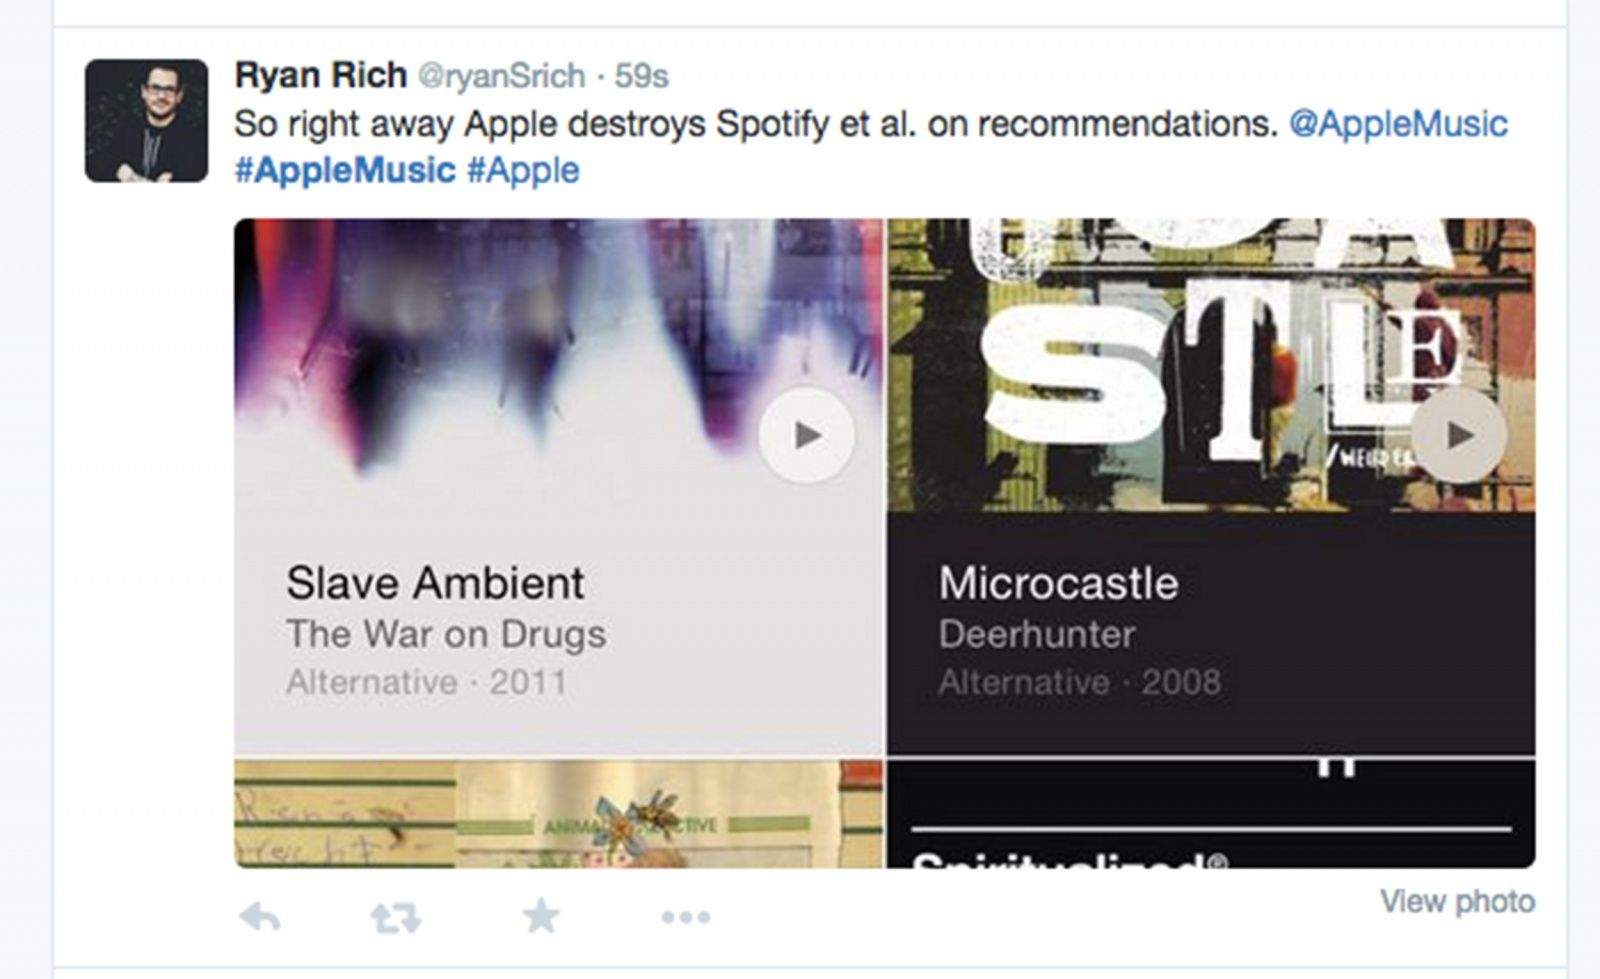 Excitement for Apple Music came with an enthusiastic farewell to Spotify for some on Twitter.